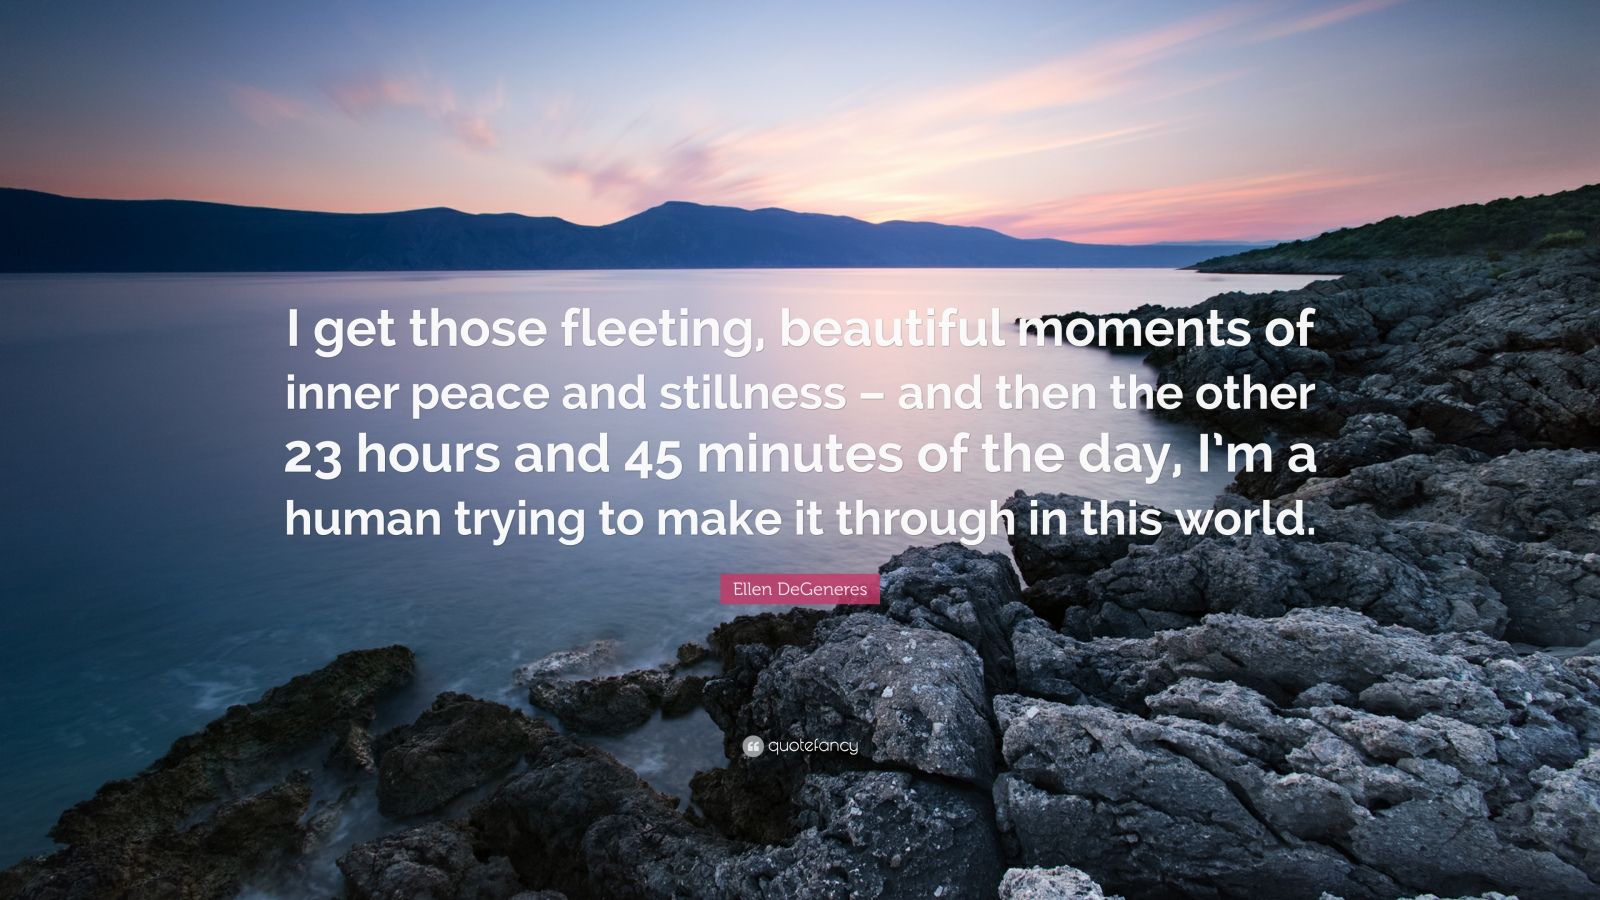 quote: "i get those fleeting, beautiful moments of inner peace